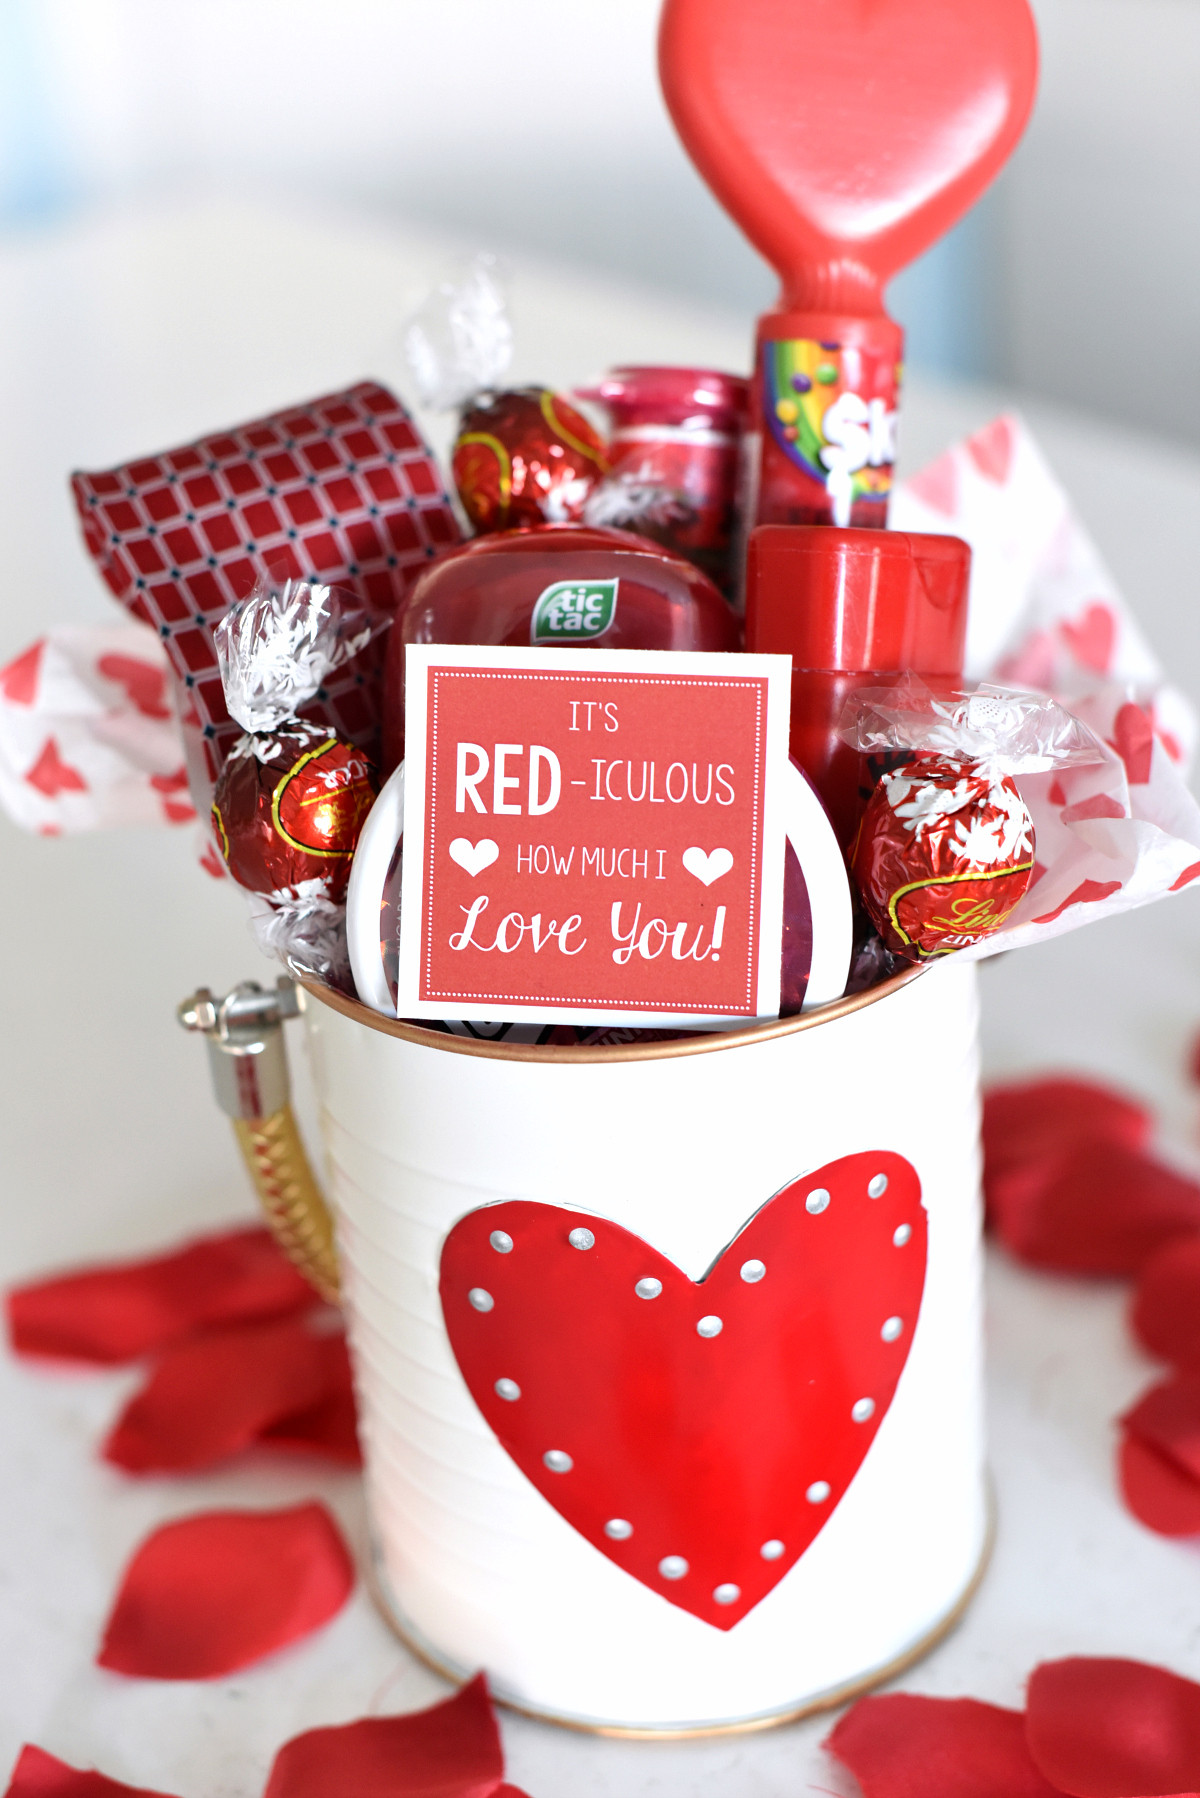 Simple Valentines Day Gift Ideas
 Cute Valentine s Day Gift Idea RED iculous Basket